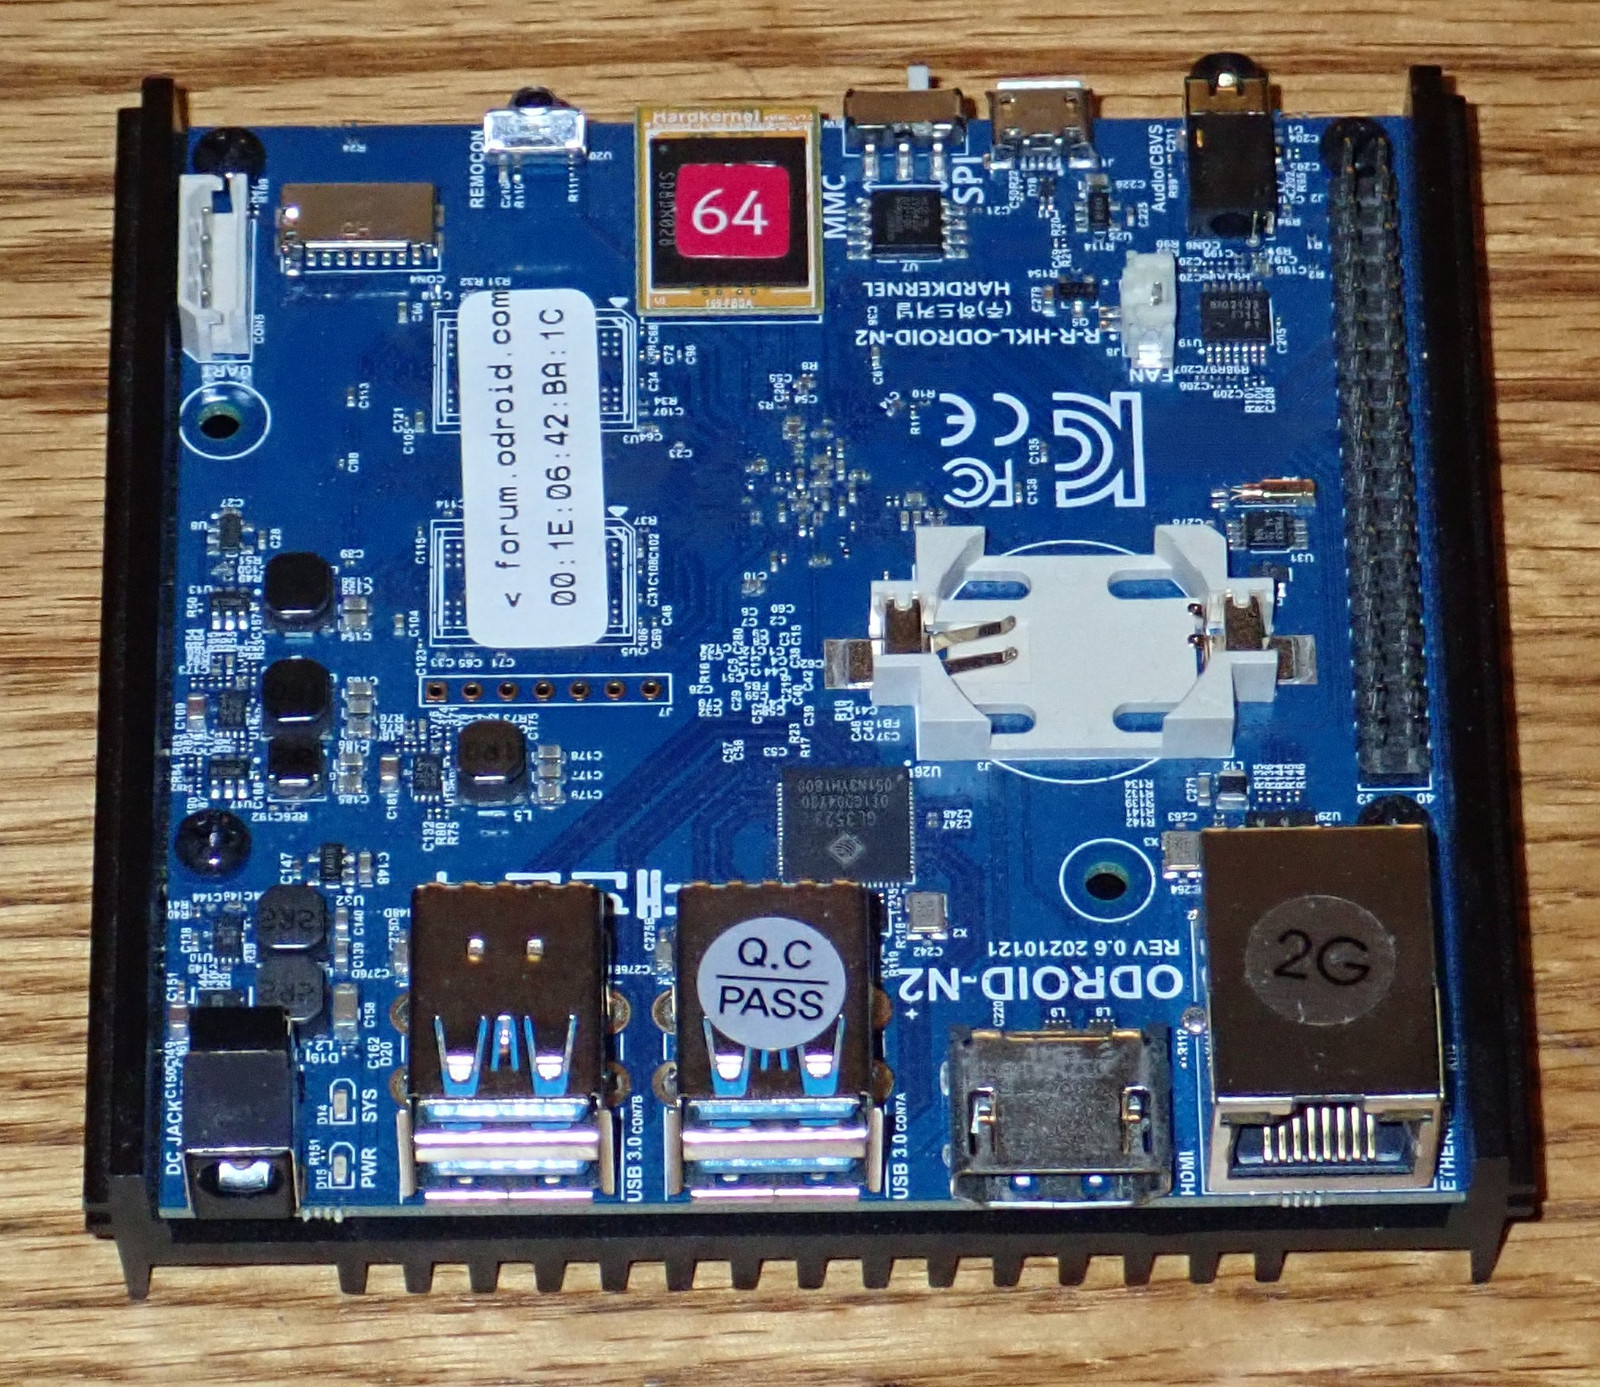 ODROID N2 Single Board Computer (SBC) (2GB) with Power Supply